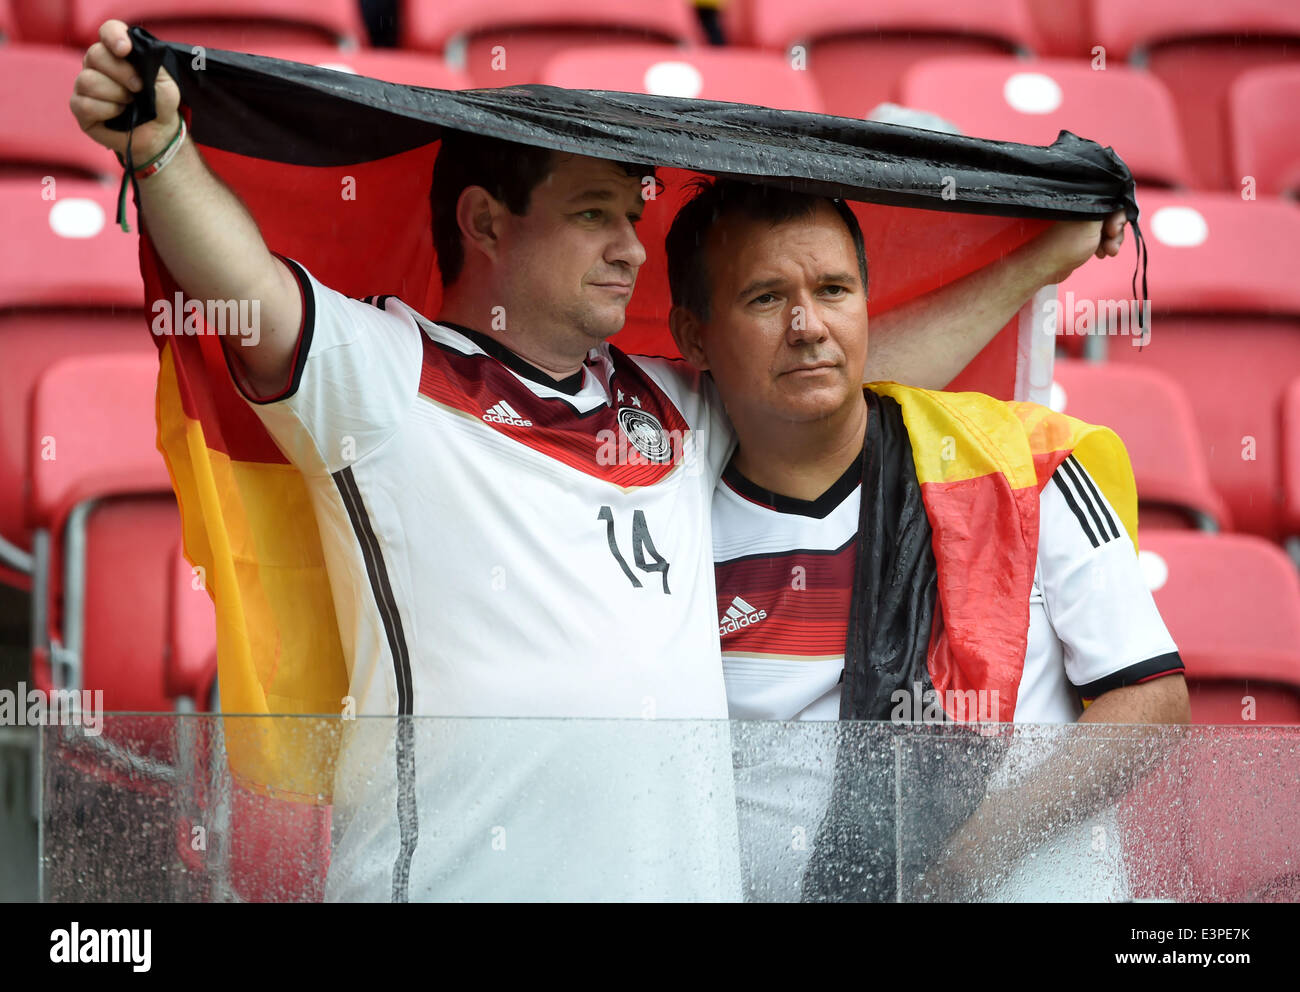 Recife, Brazil. 26th June, 2014. Two supporters of Germany are seen before a Group G match between the U.S. and Germany of 2014 FIFA World Cup at the Arena Pernambuco Stadium in Recife, Brazil, on June 26, 2014. Credit:  Guo Yong/Xinhua/Alamy Live News Stock Photo